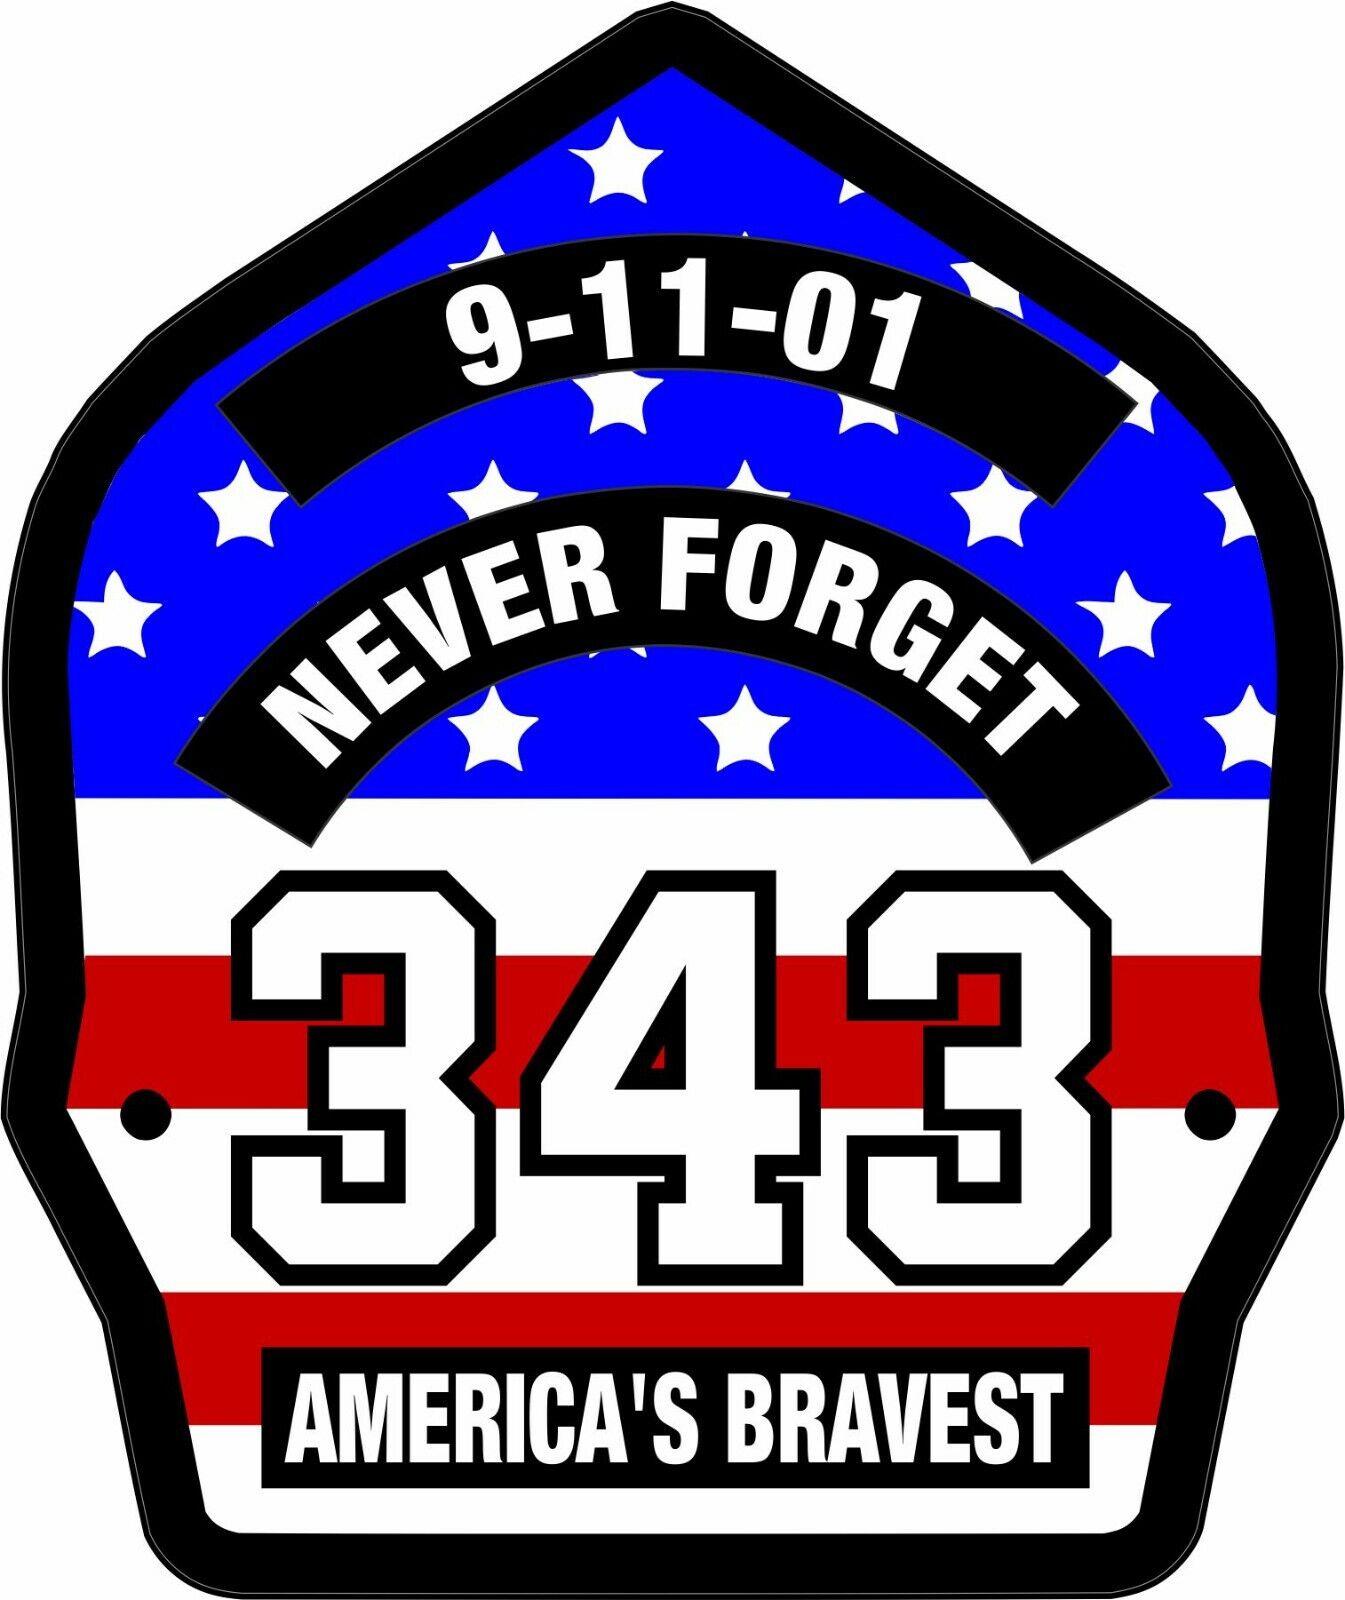 Firefighter Sticker 911 Never Forget 343 USA Flag look Decal Various sizes 343